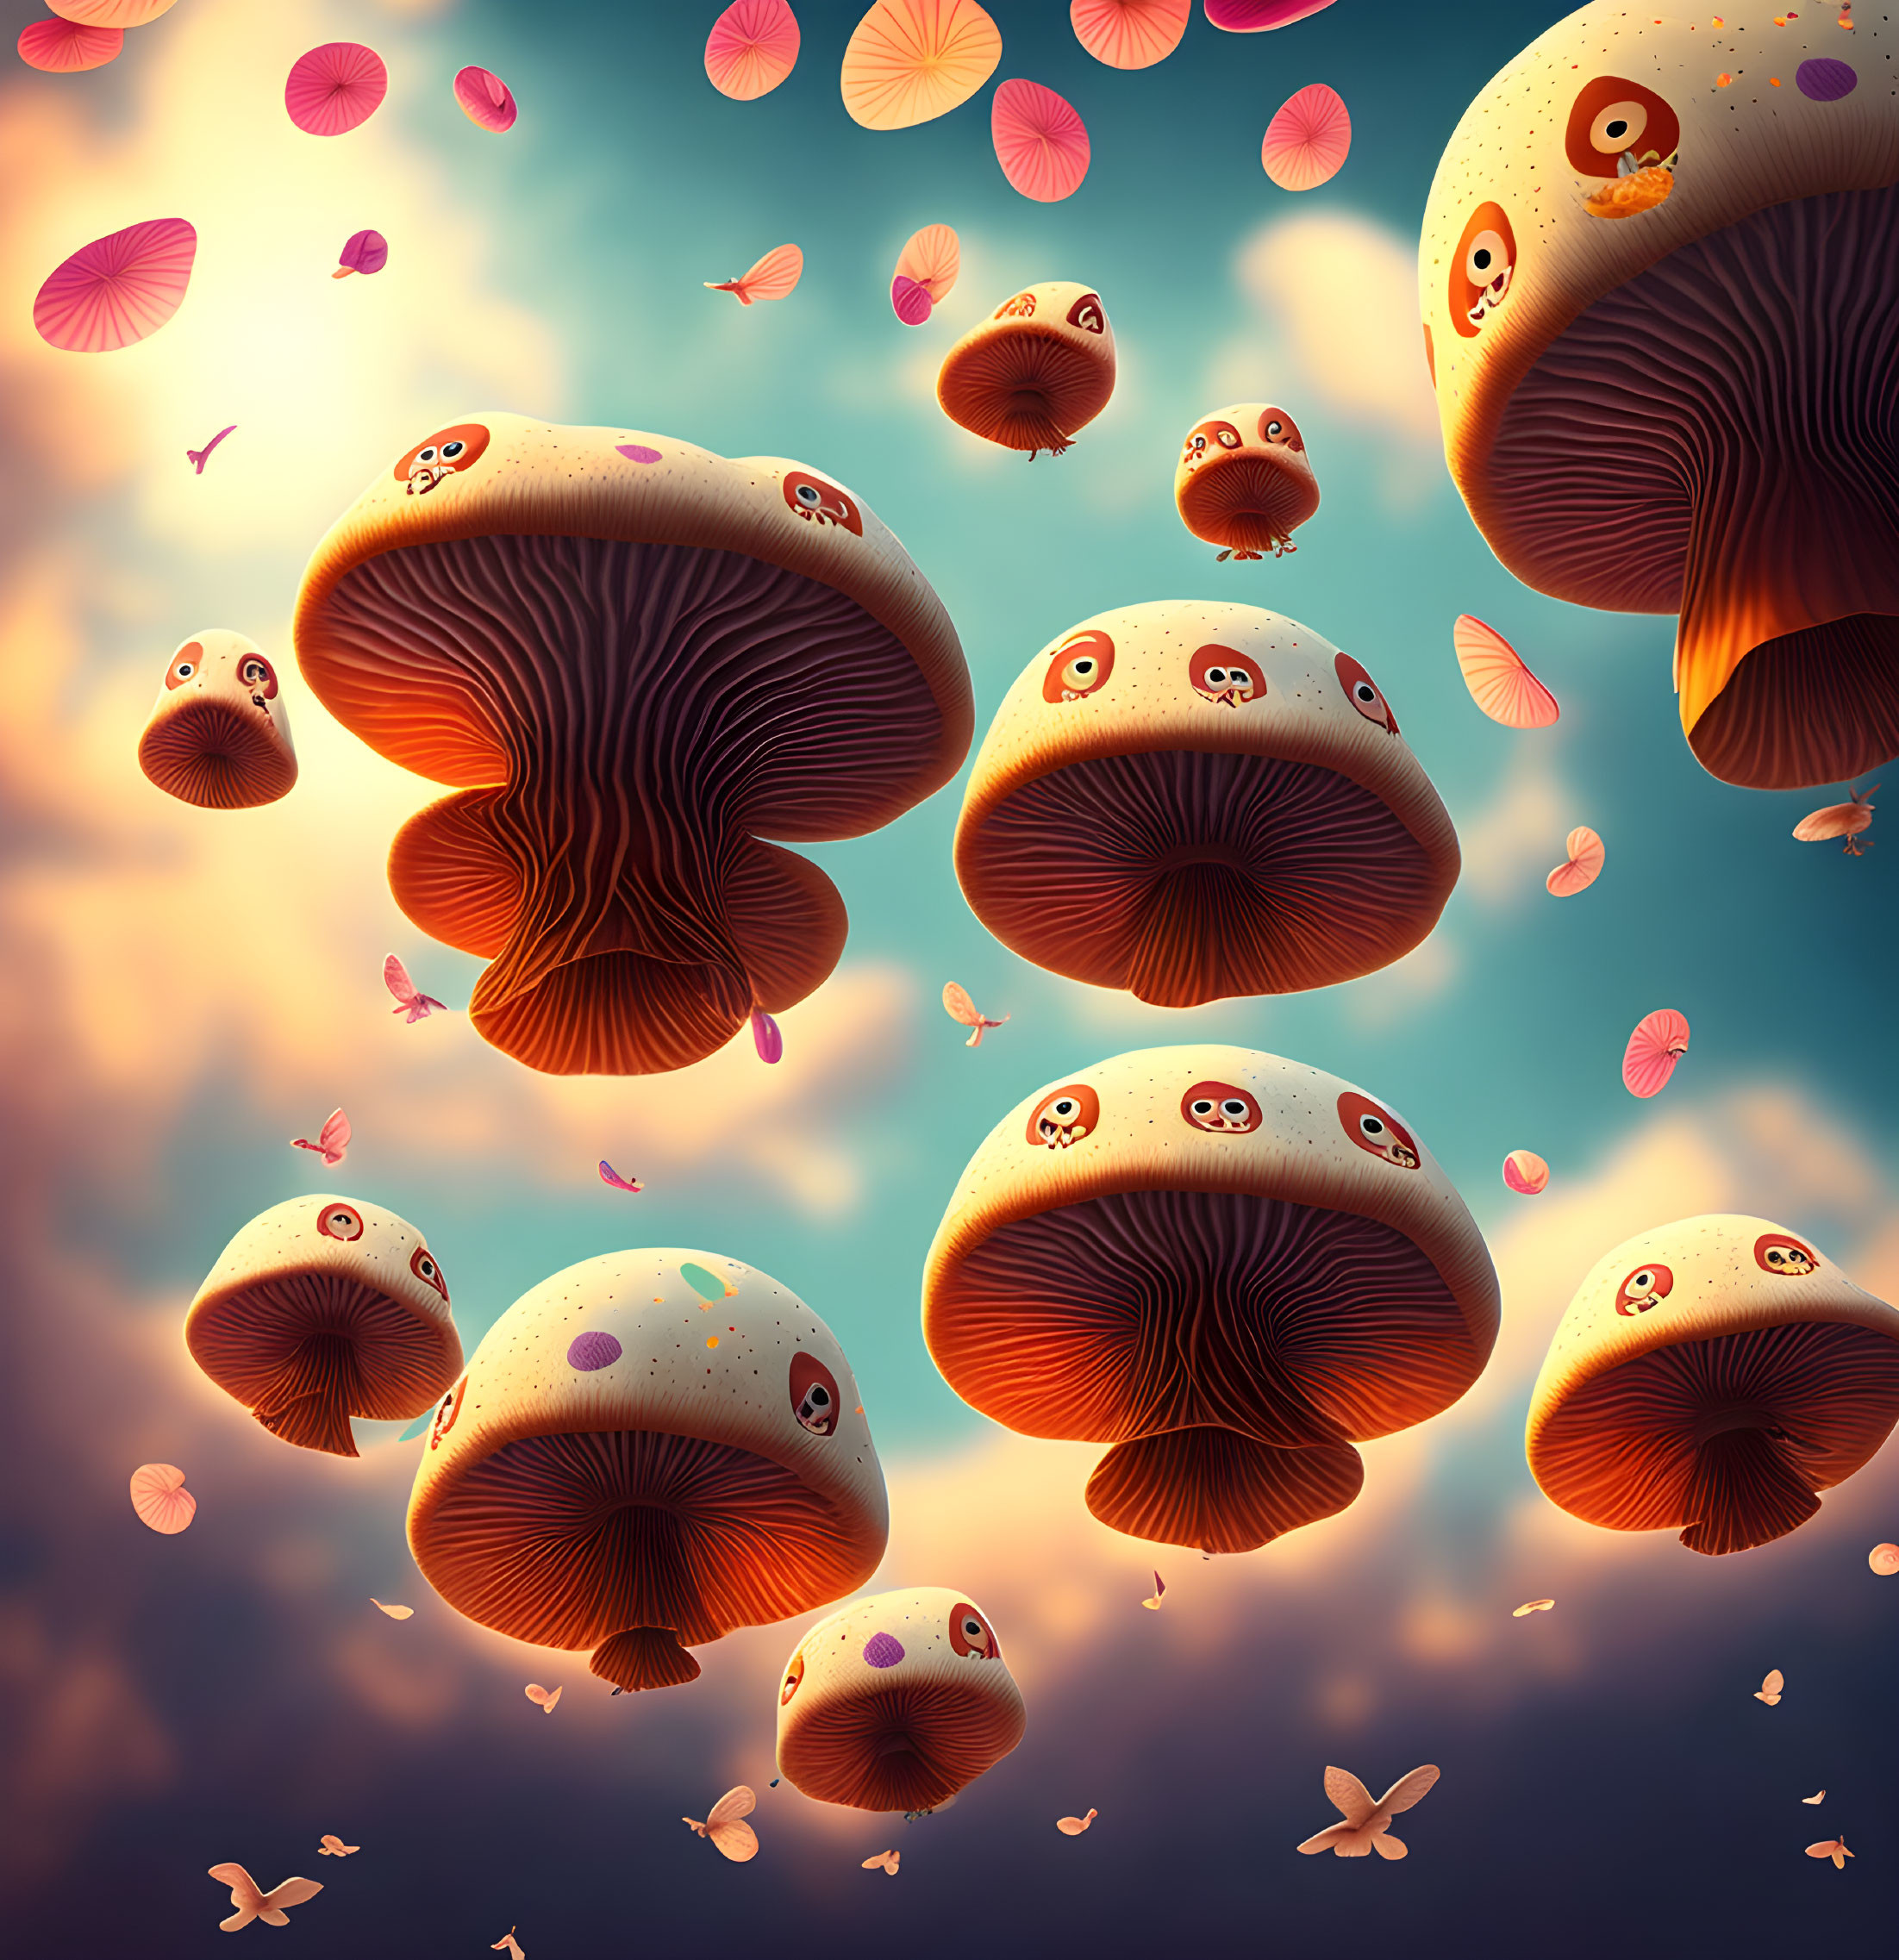 Mushroom owls flying in outer space 